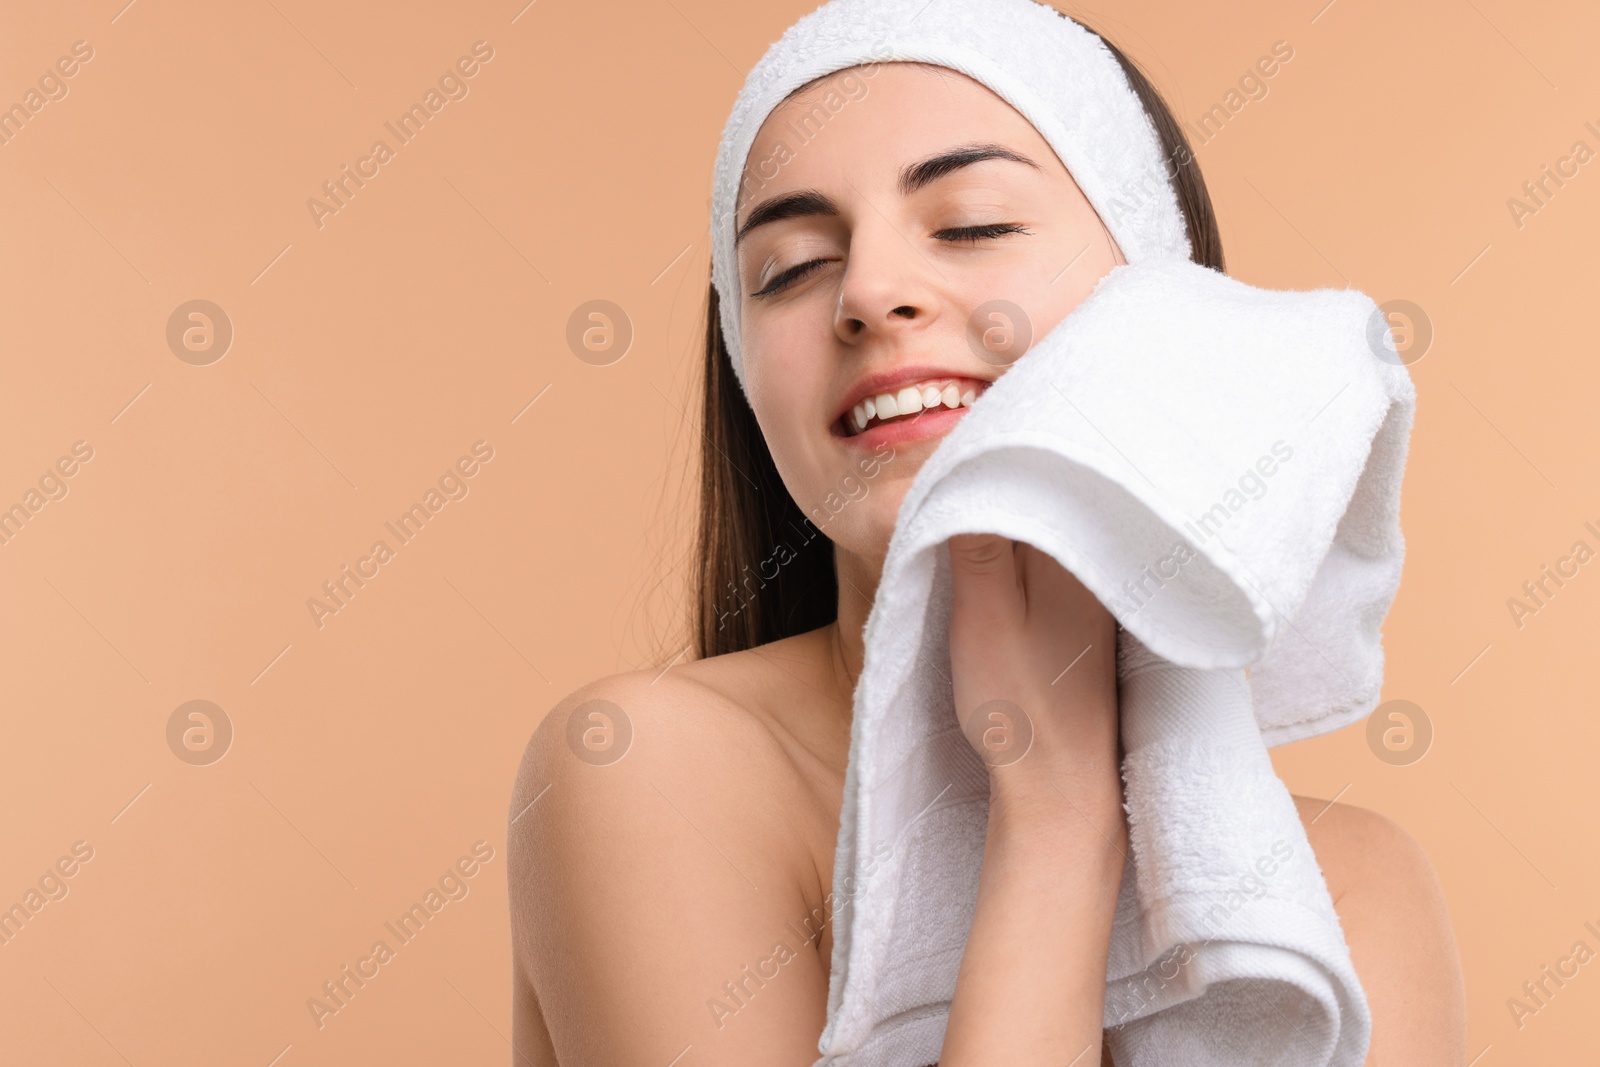 Photo of Washing face. Young woman with headband and towel on beige background, space for text